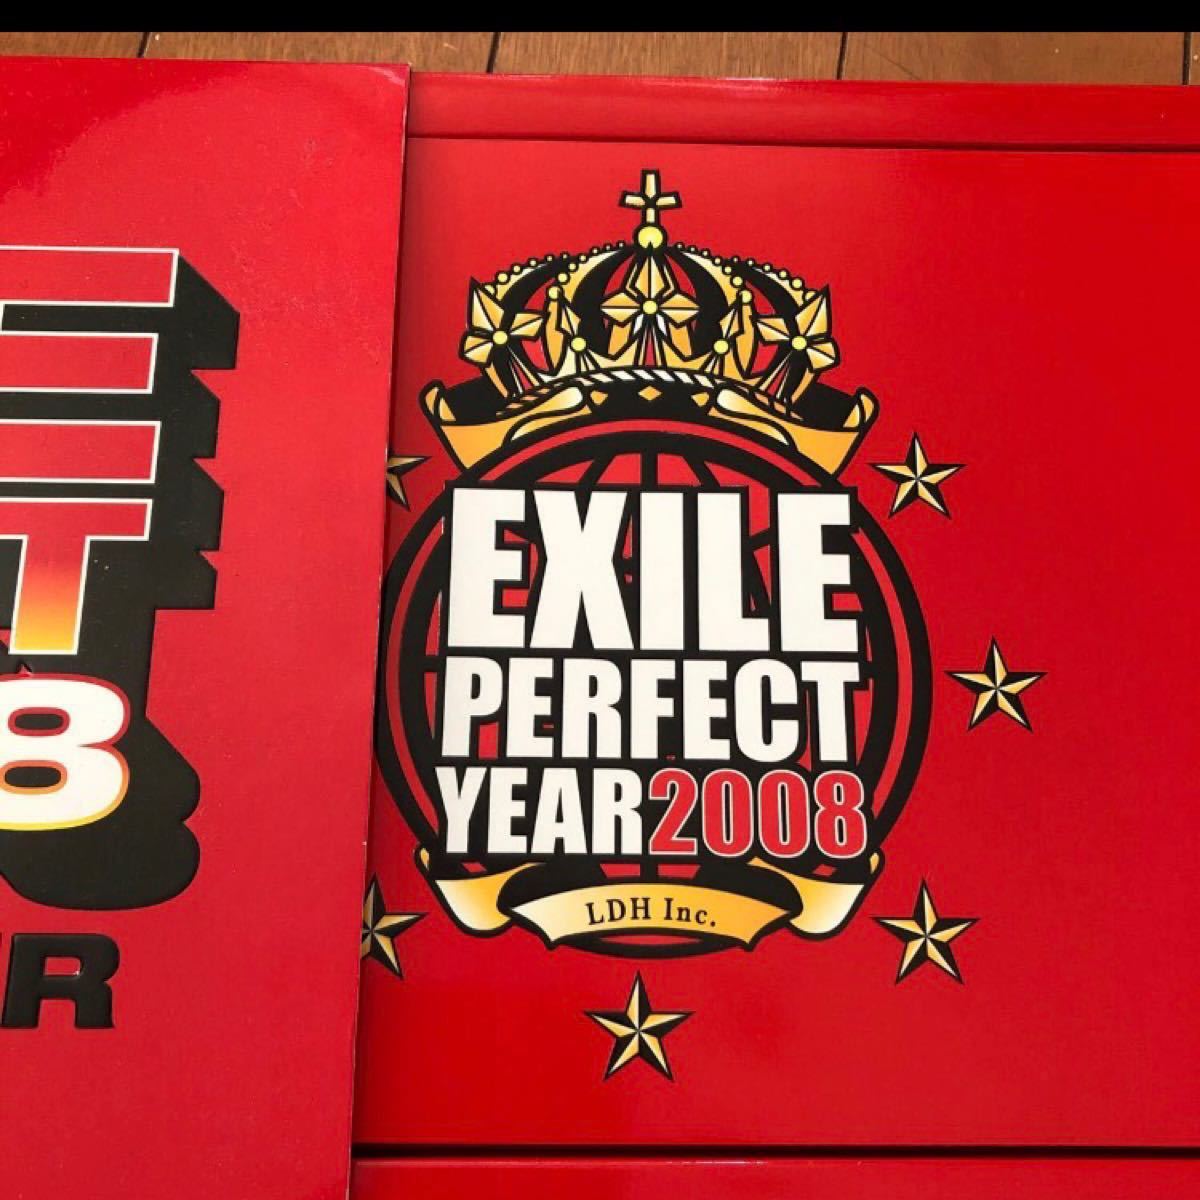 “EXILE PERFECT LIVE 2008” ツアーパンフレット